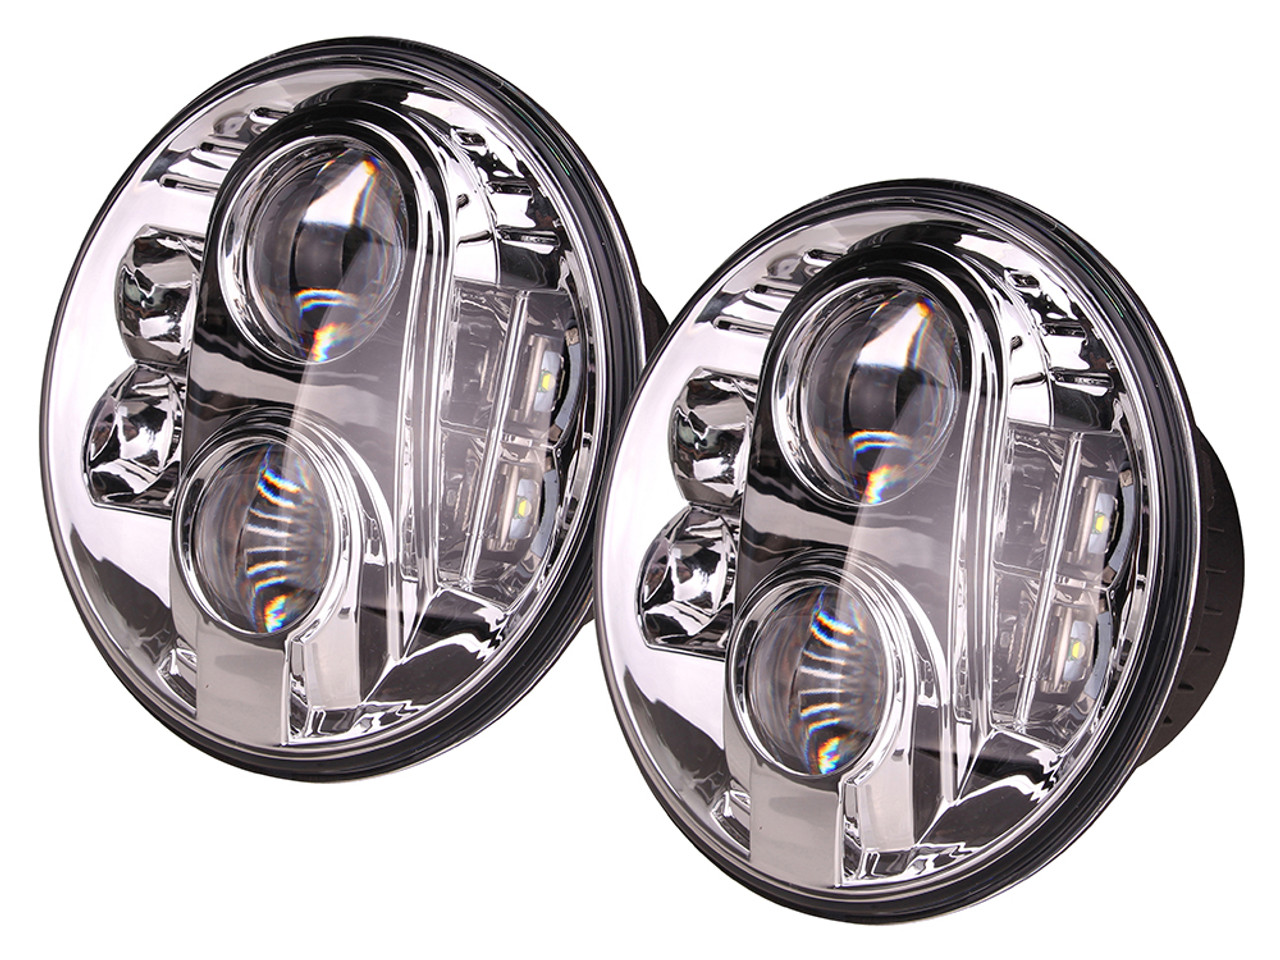 Wipac Land Rover Defender Pair 7 LED Black Headlights S7097LED